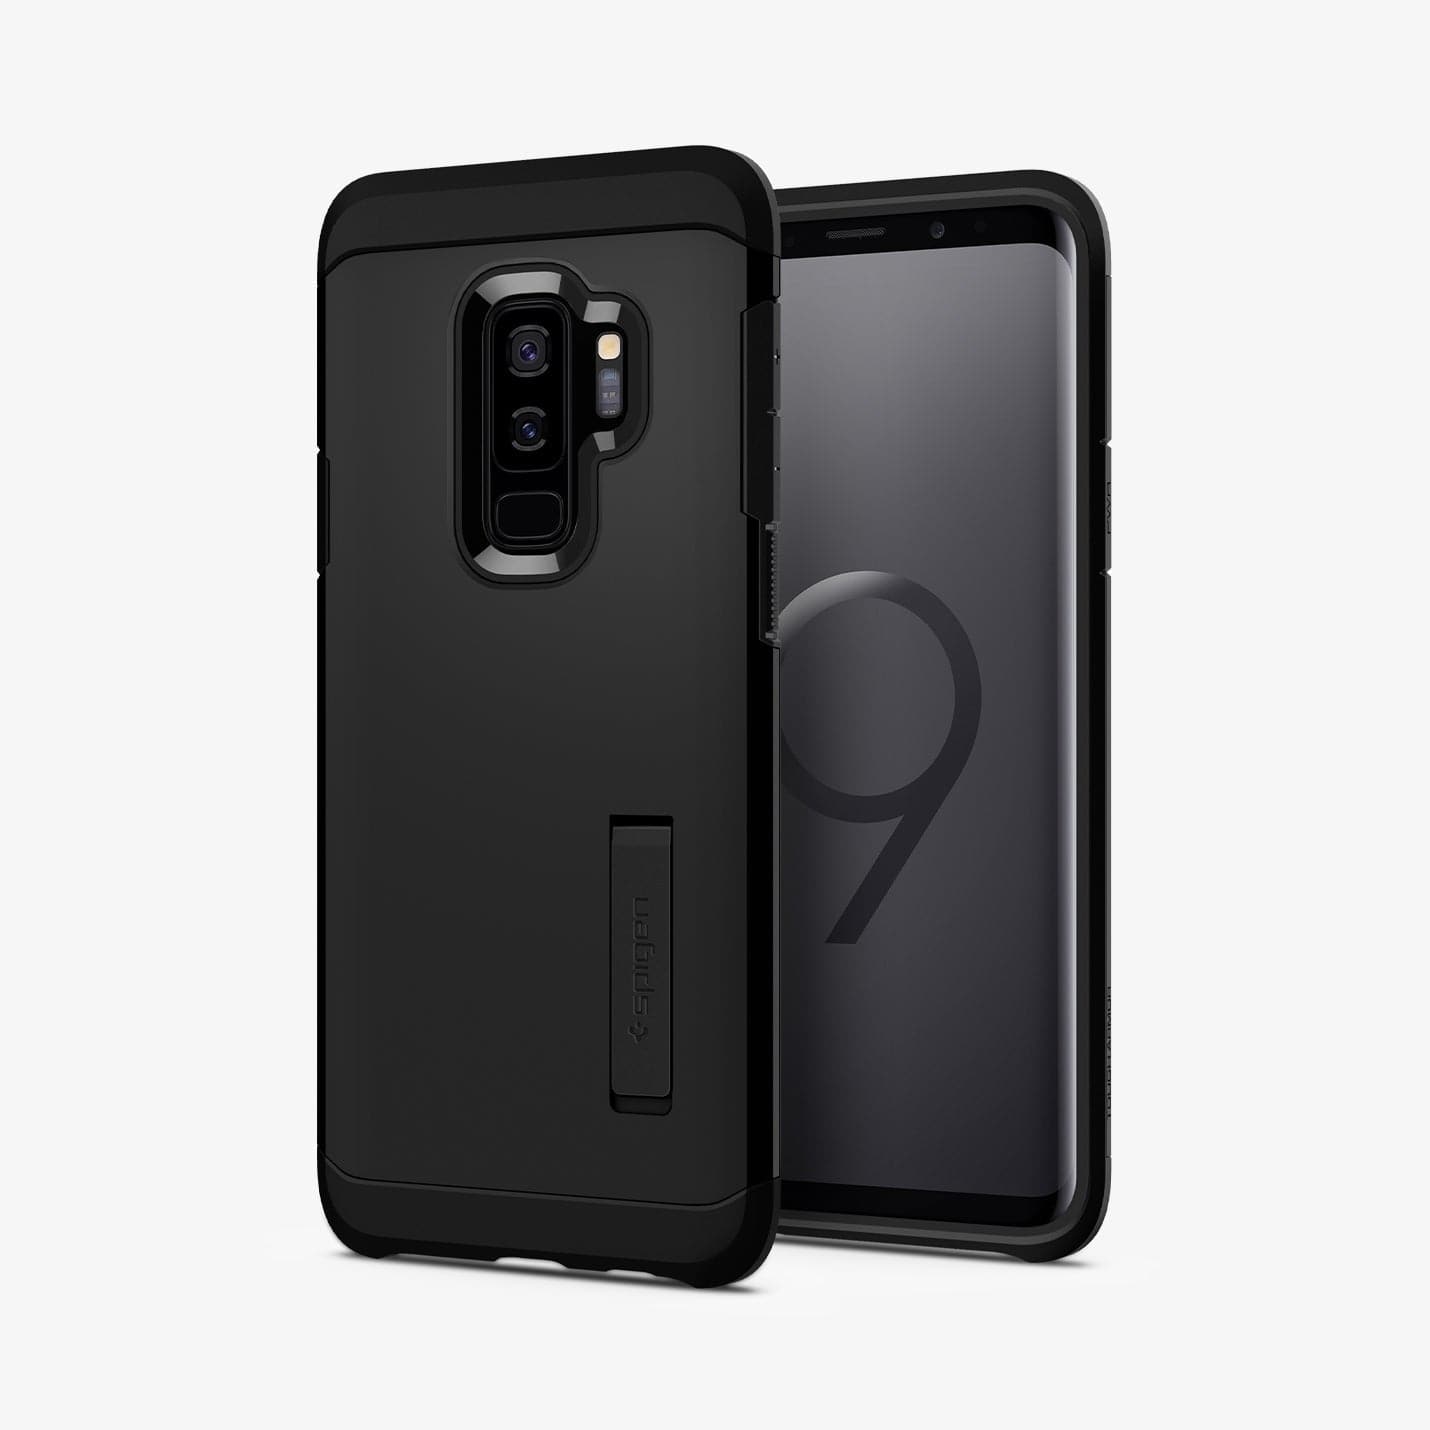 593CS22933 - Galaxy S9 Plus Tough Armor Case in black showing the back and front